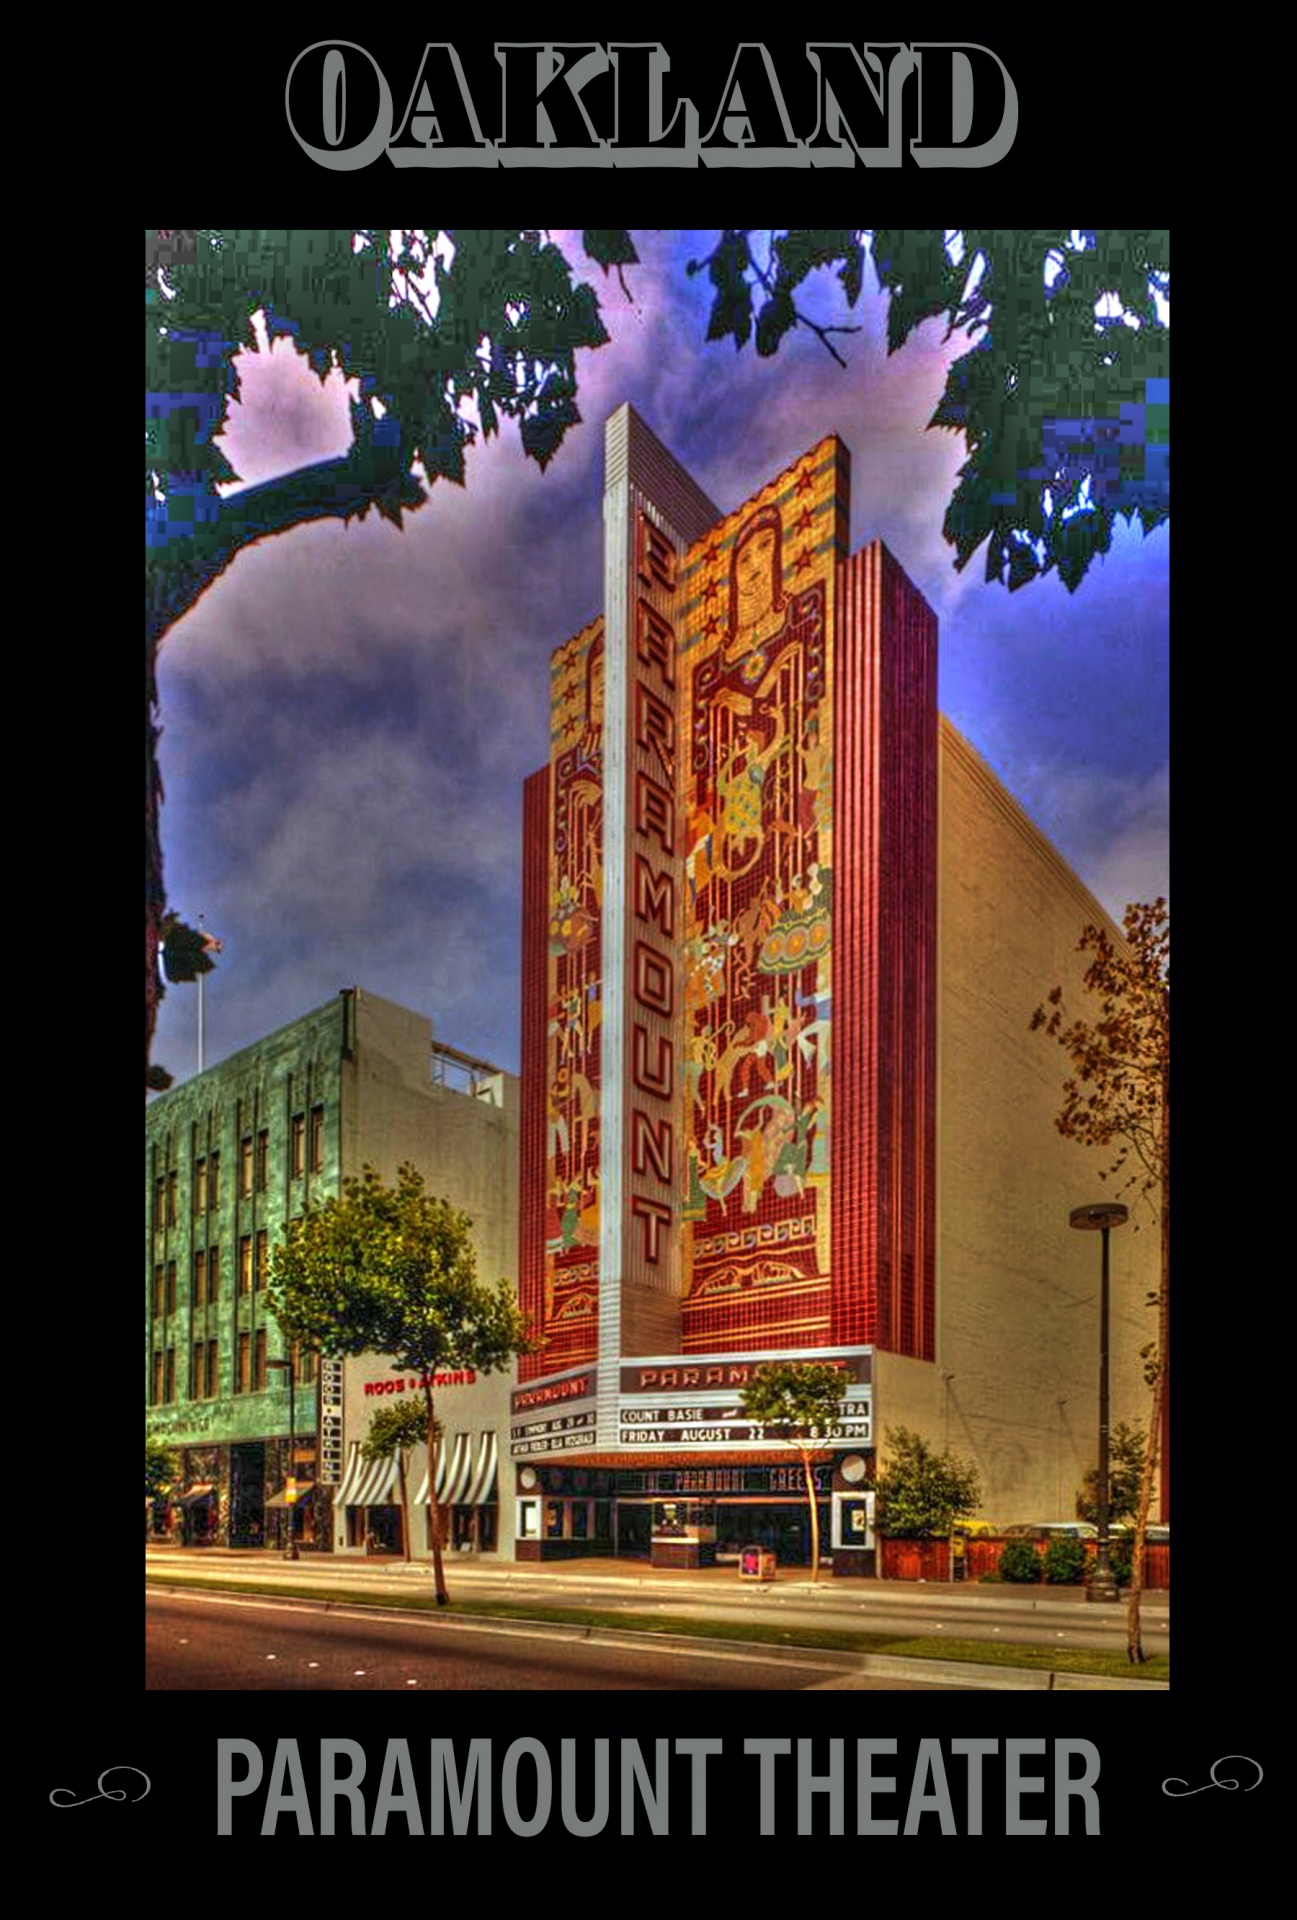 Paramount Theater In Oakland, Calif